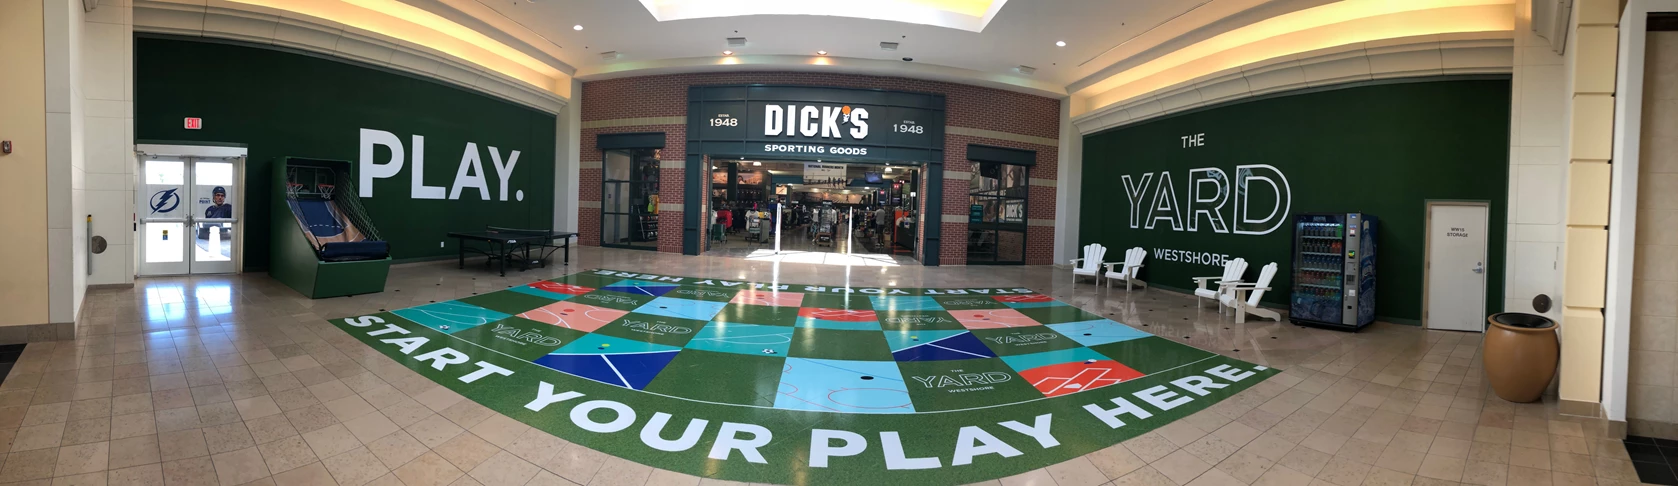 Westshore Plaza Indoor Play Area with Wall and Floor Graphics